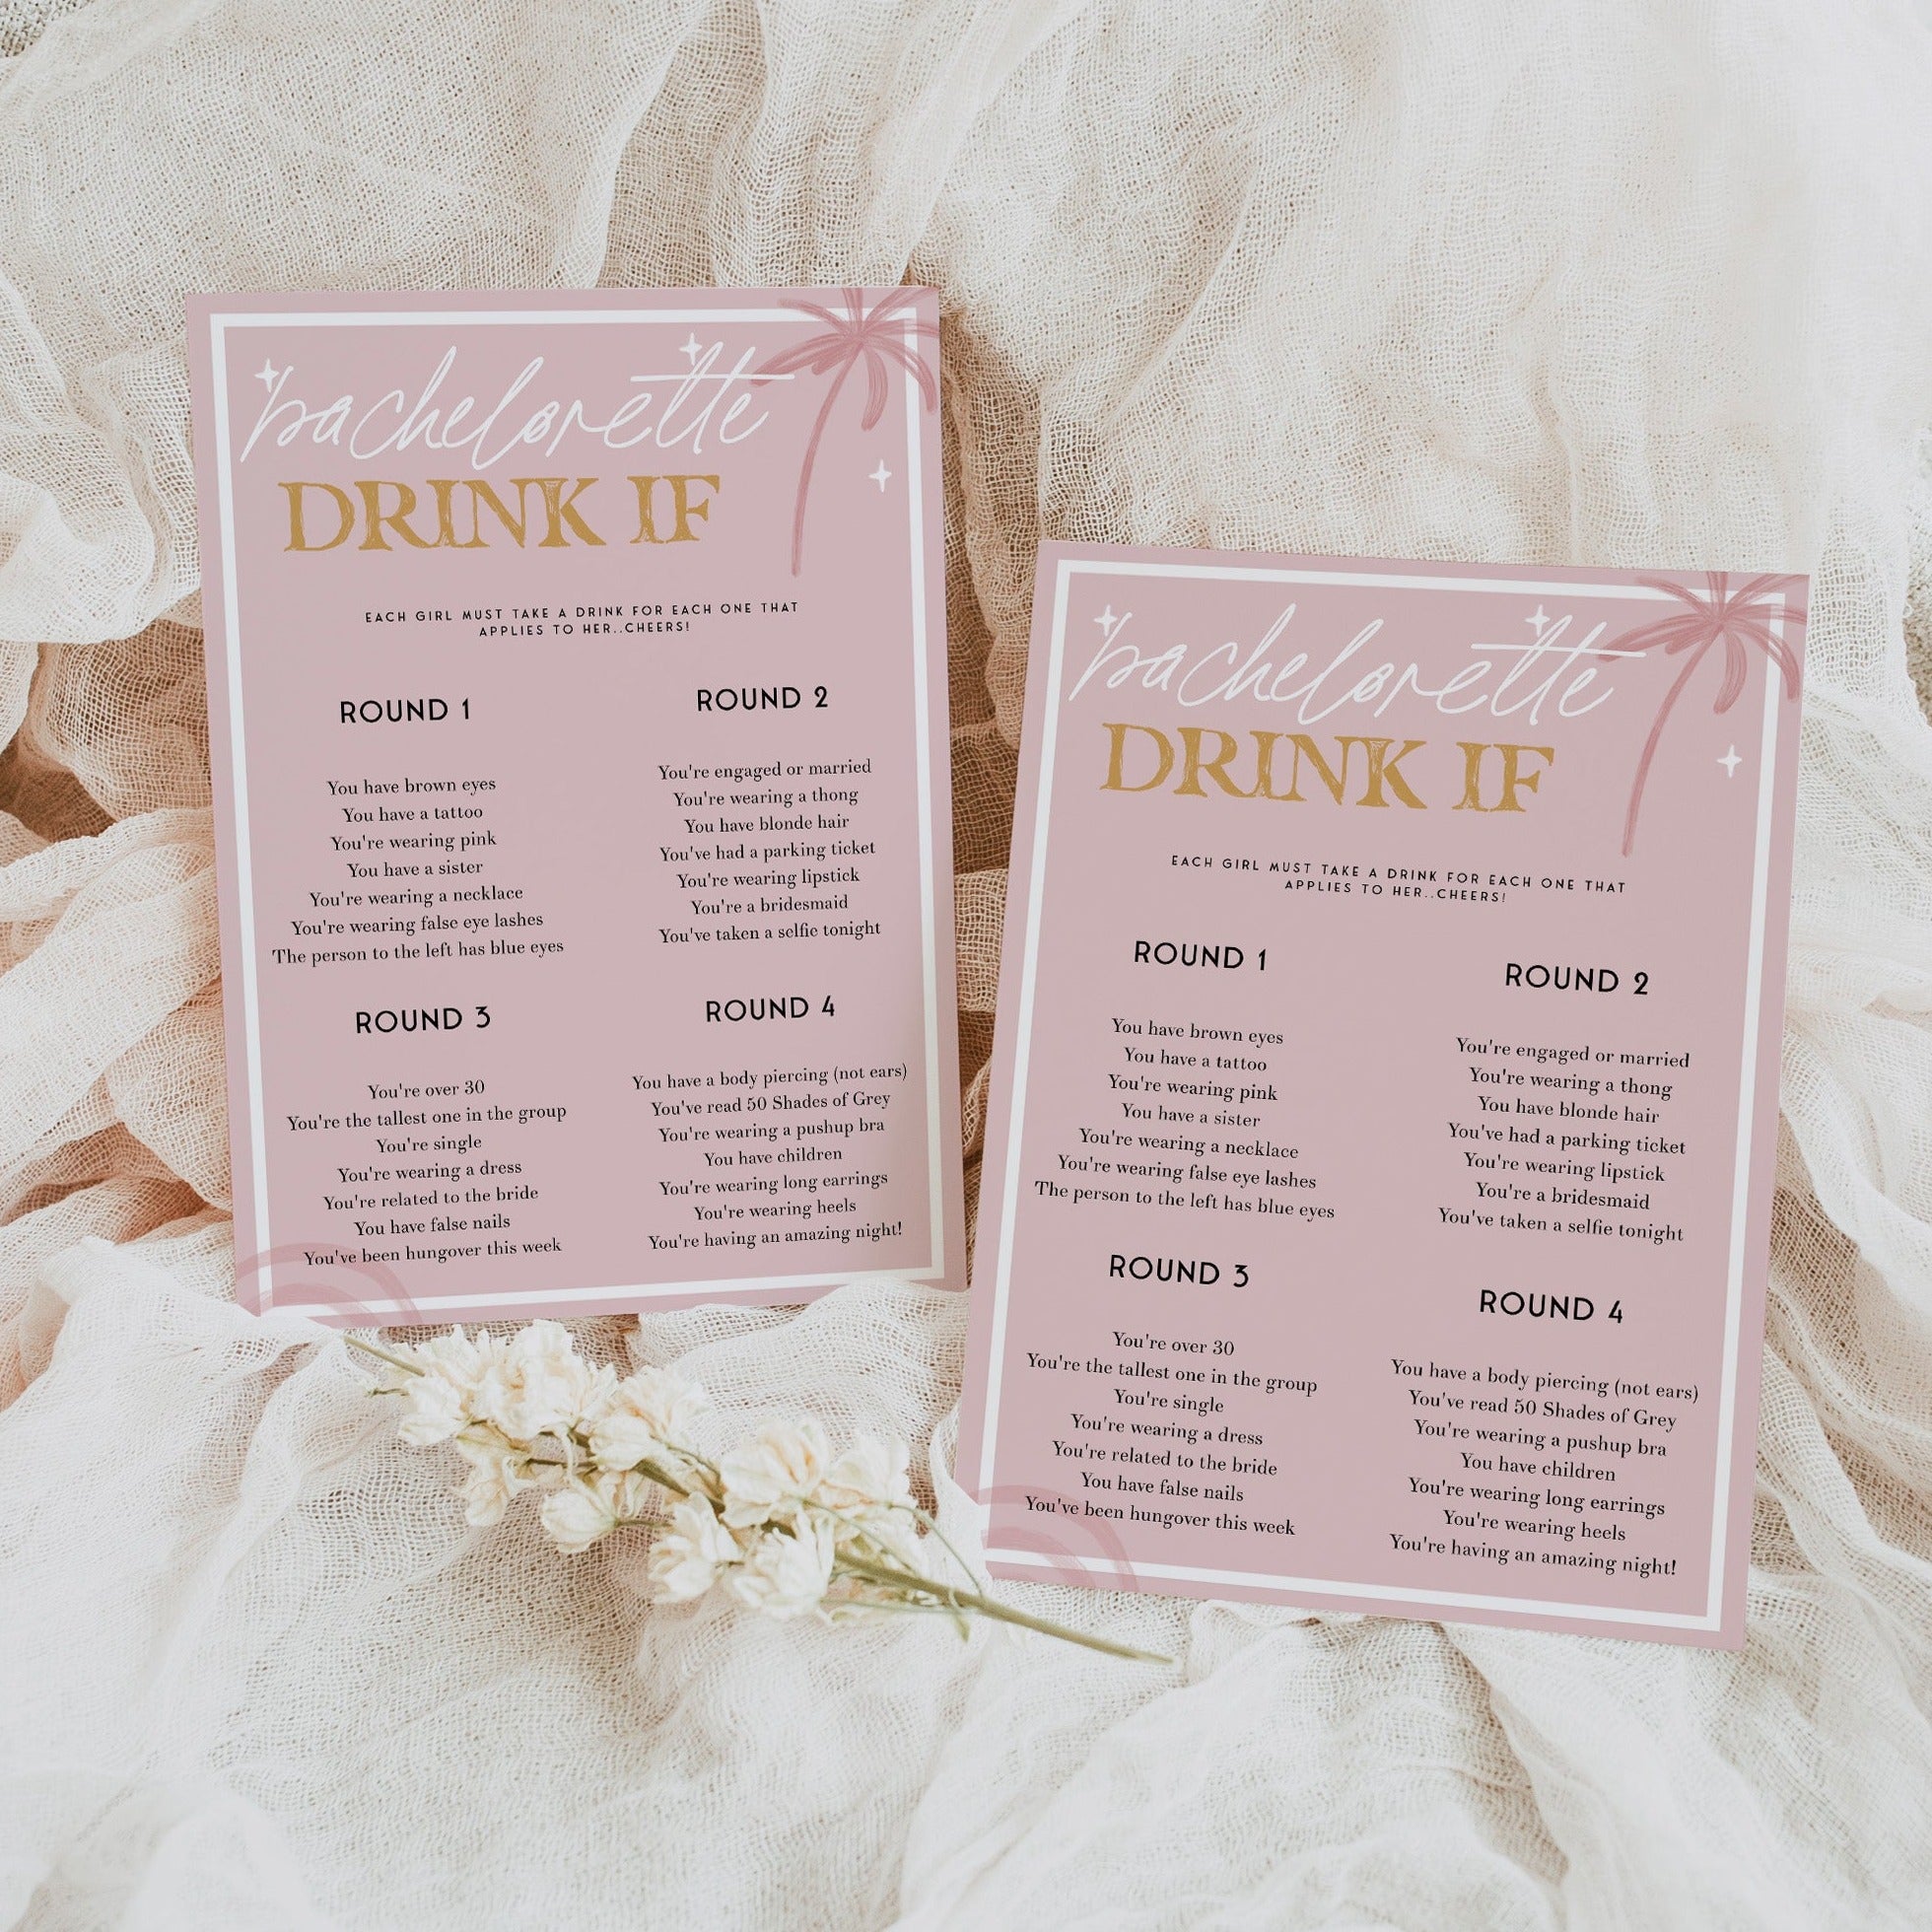 Fully editable and printable bridal shower bachelorette drink if game with a Palm Springs design. Perfect for a Palm Springs bridal shower themed party